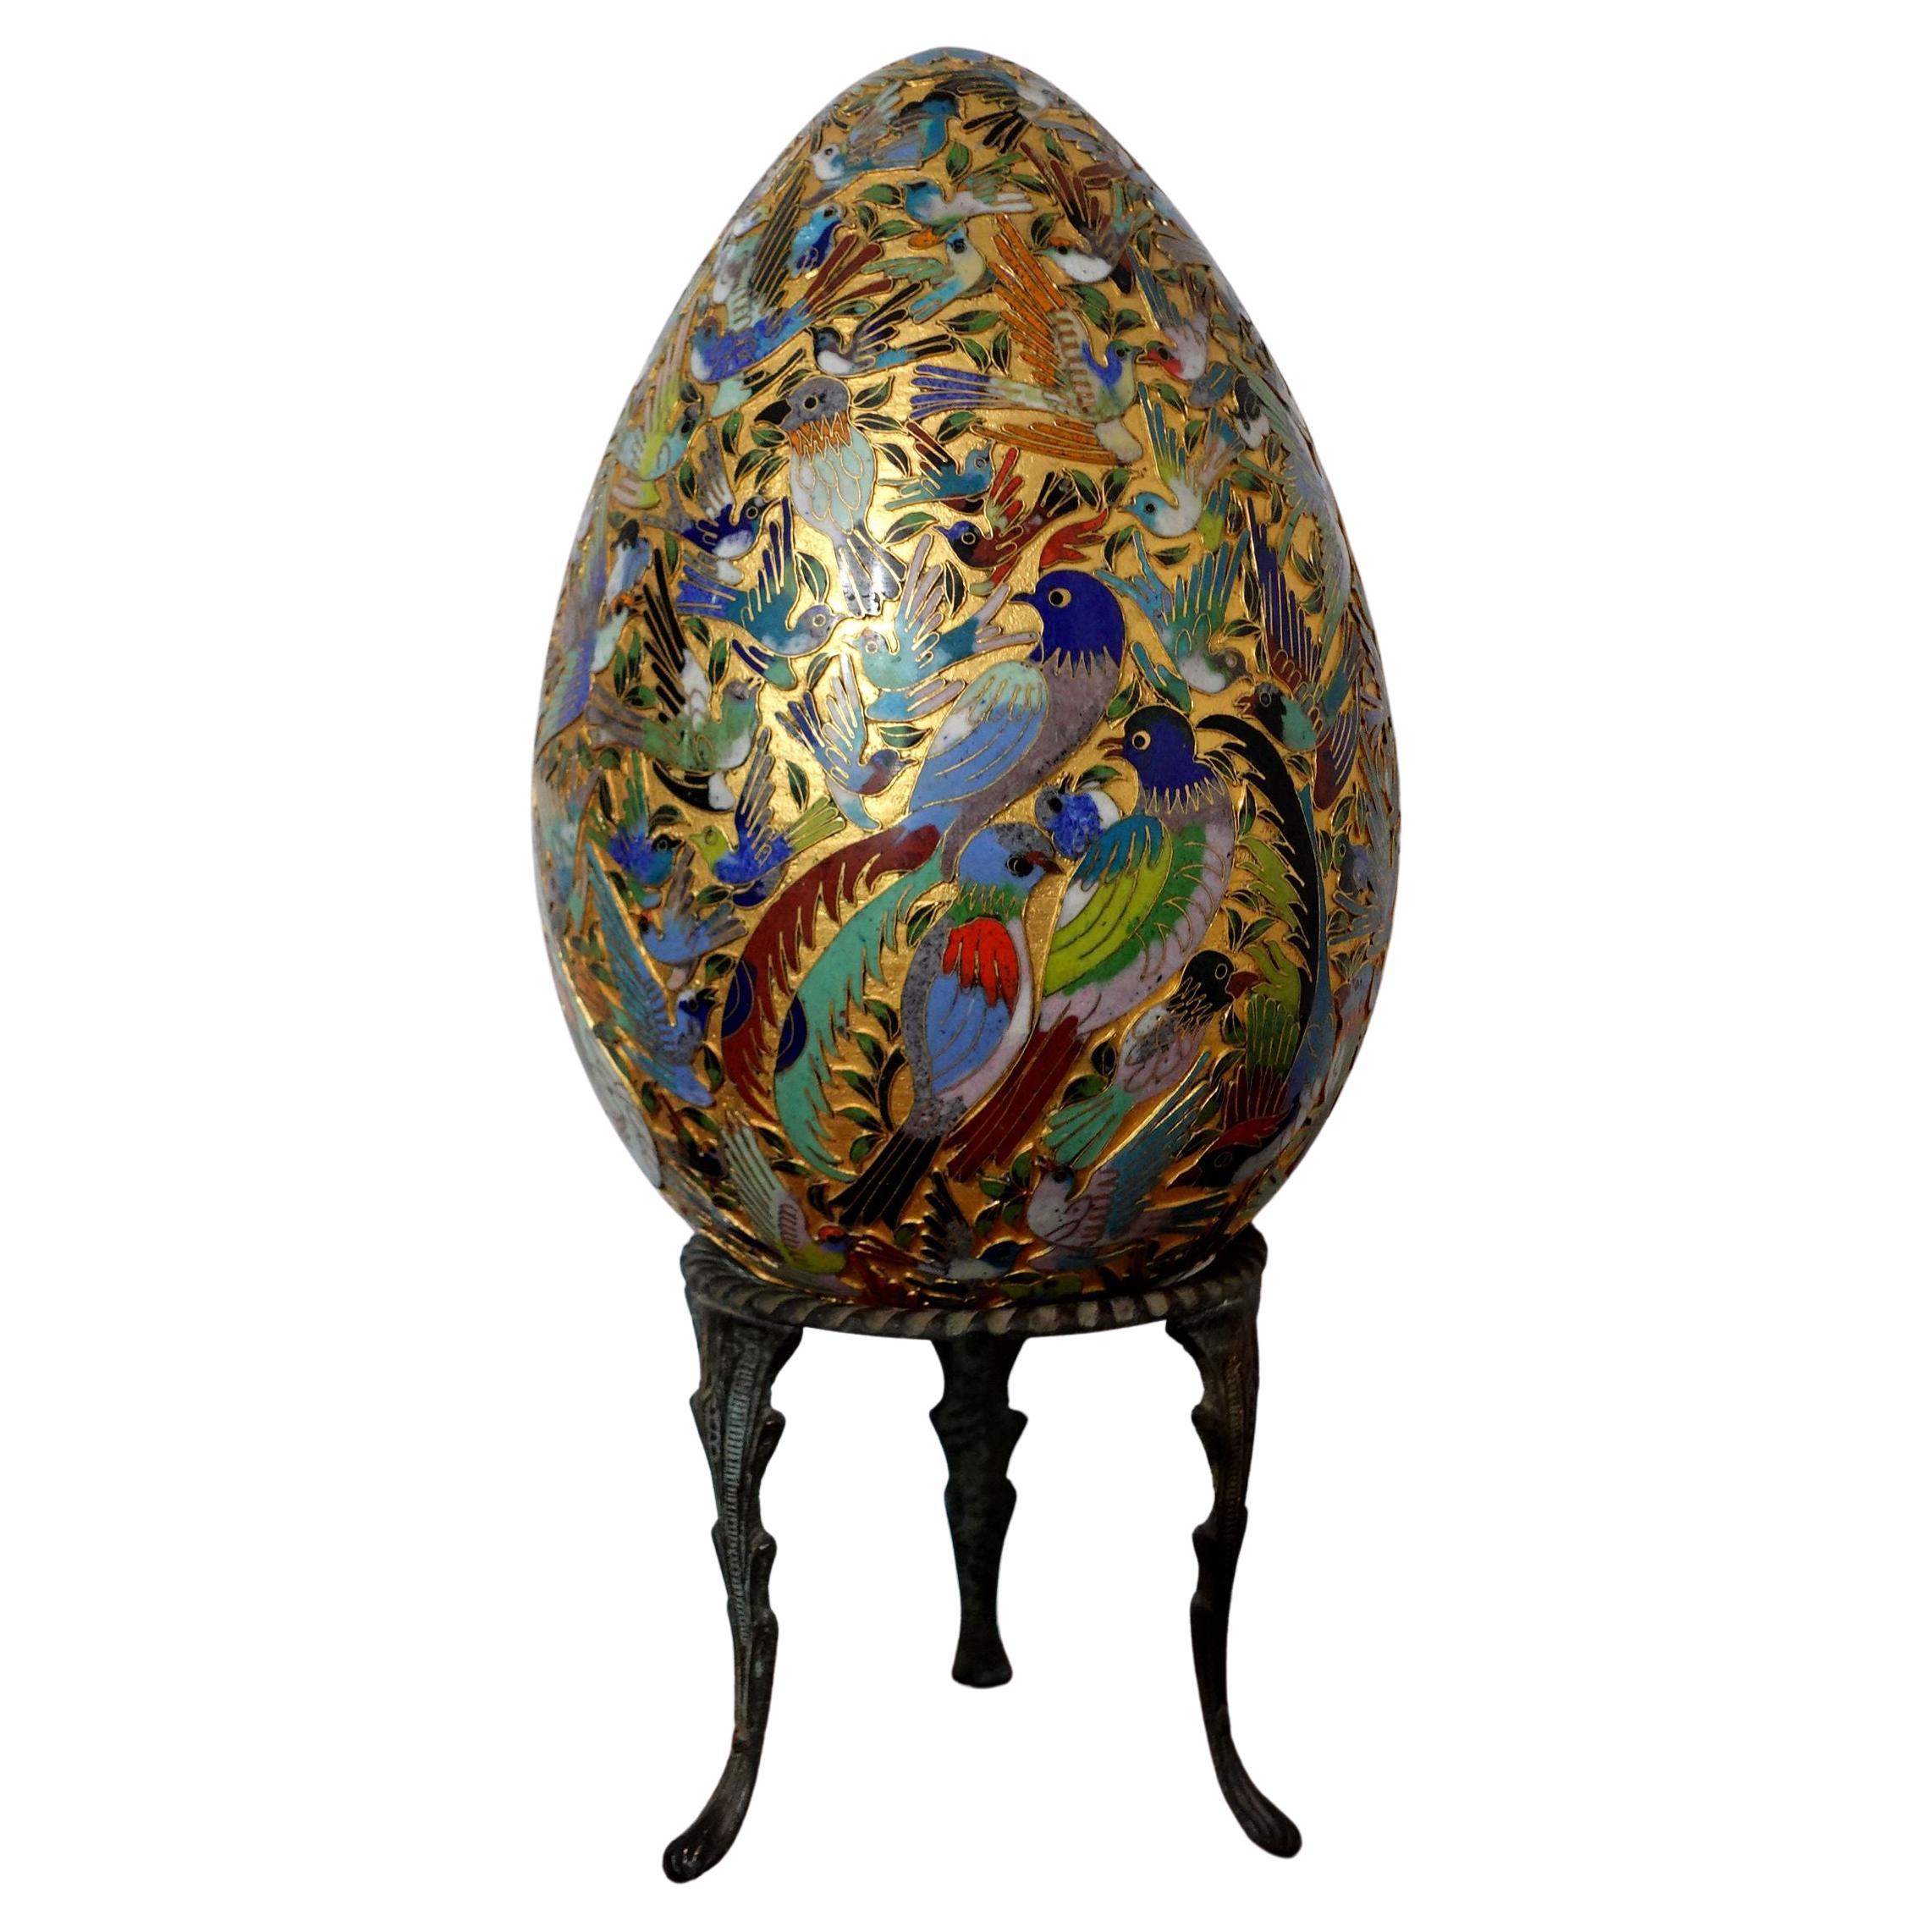 Chinese Supper Large Cloisonné Enamel Egg "Hundred Birds" with Bronze Stand